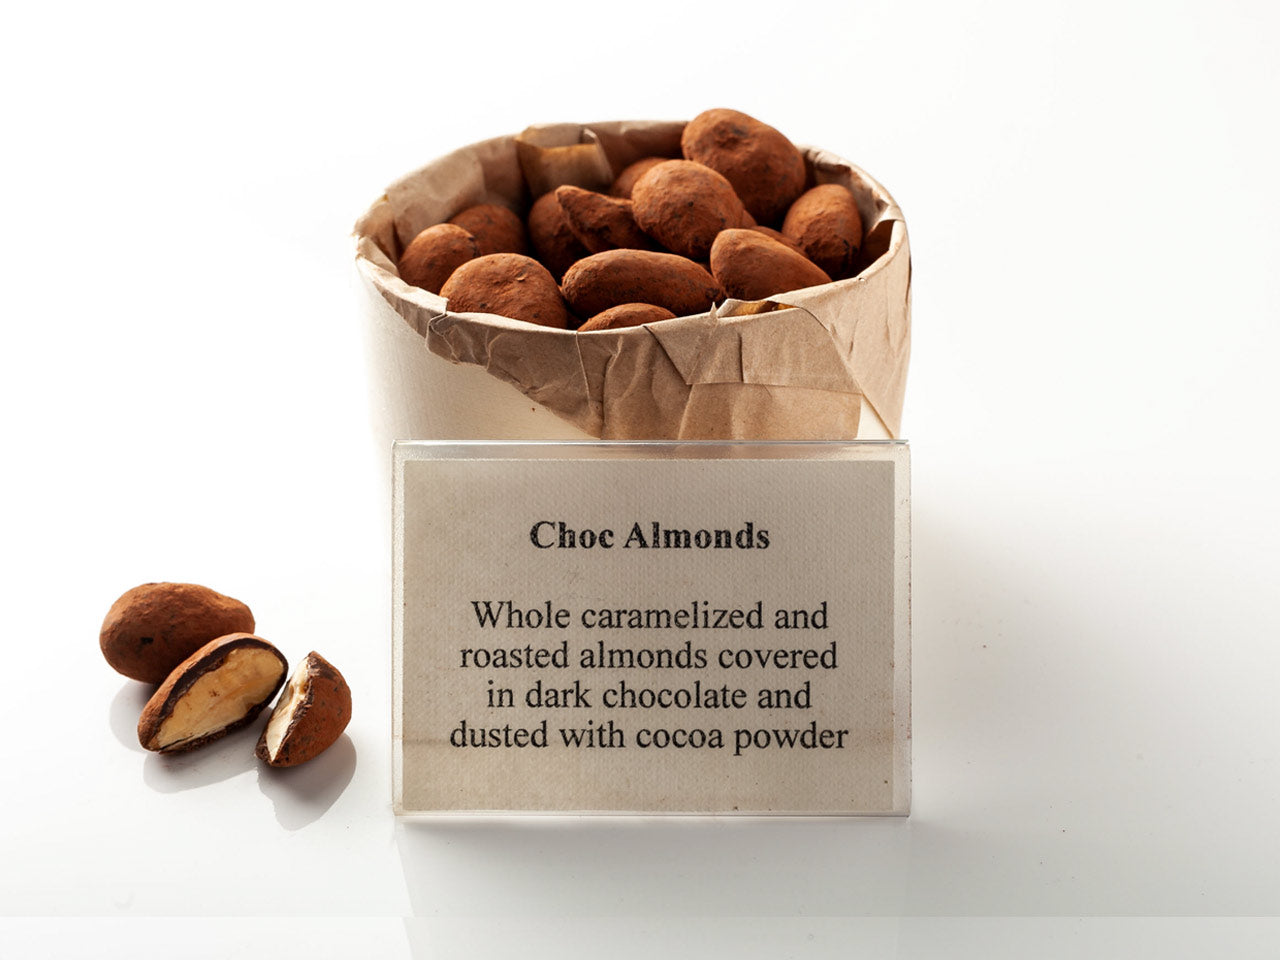 Chocolate dusted Almonds